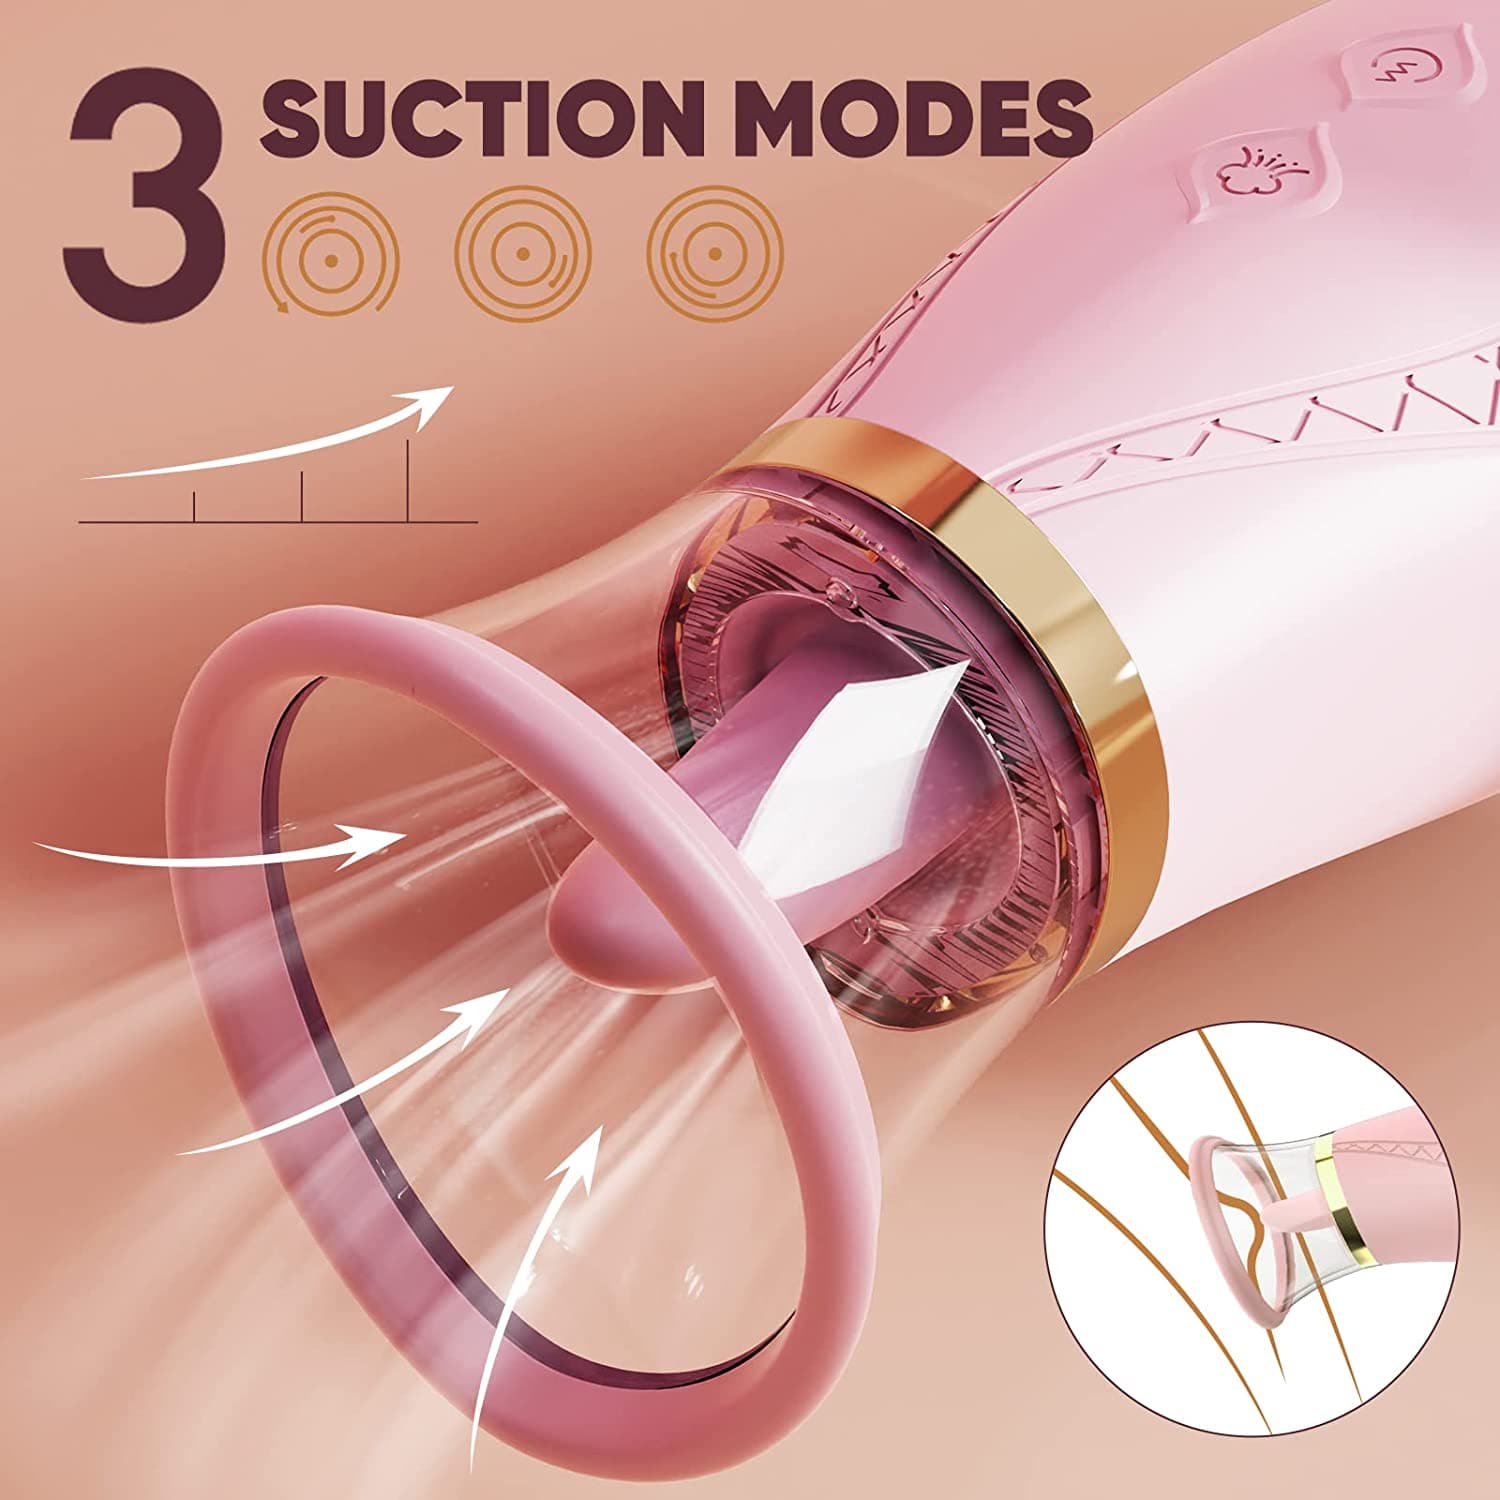 【NEW】3 in 1 Tongue sucking and licking clit or nipple stimulator-3 suction and 9 vibration pink